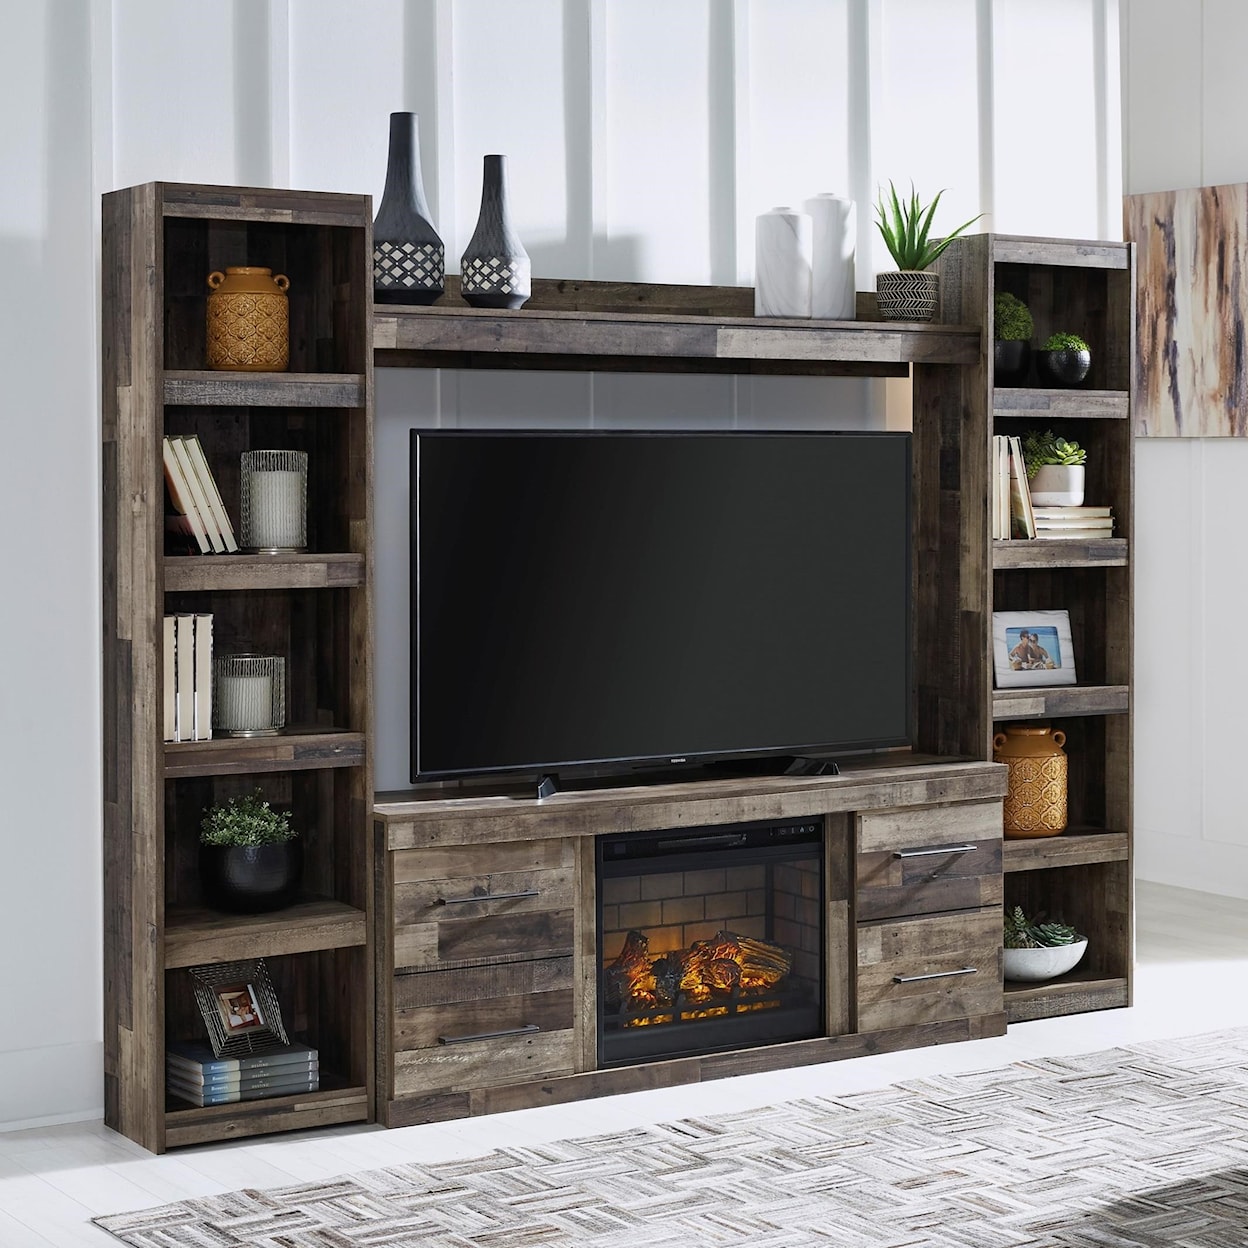 Signature Design by Ashley Derekson Entertainment Wall Unit with Fireplace